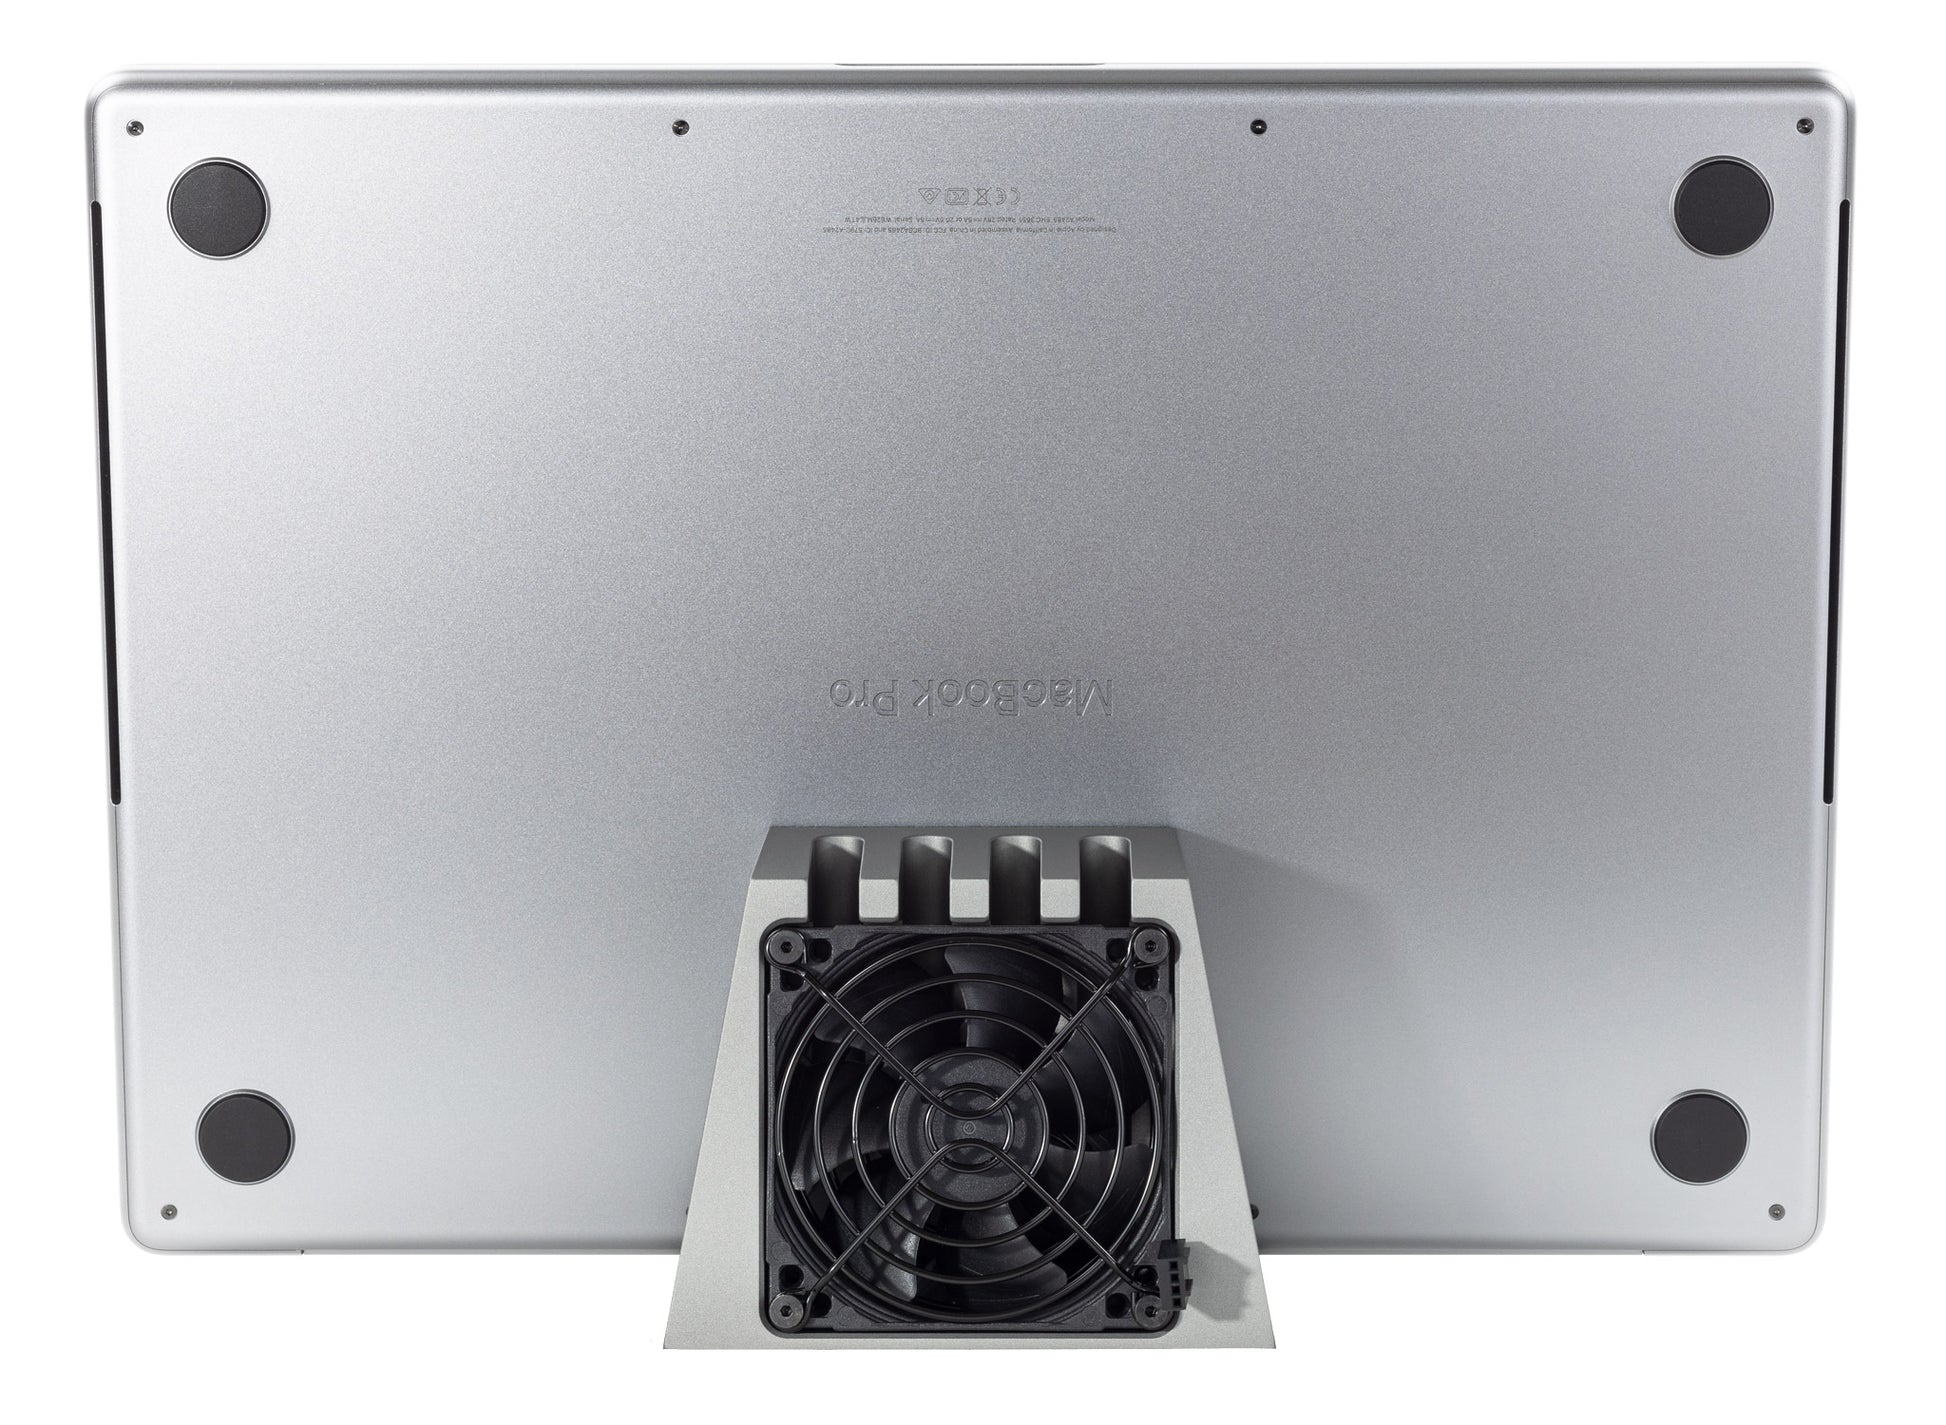 SVALT Cooling Dock model DHCx gray back view for quiet active airflow and thermally conductive heatsink cooling performance with Apple laptop 2021-2023 M1 Max 16-inch MacBook Pro